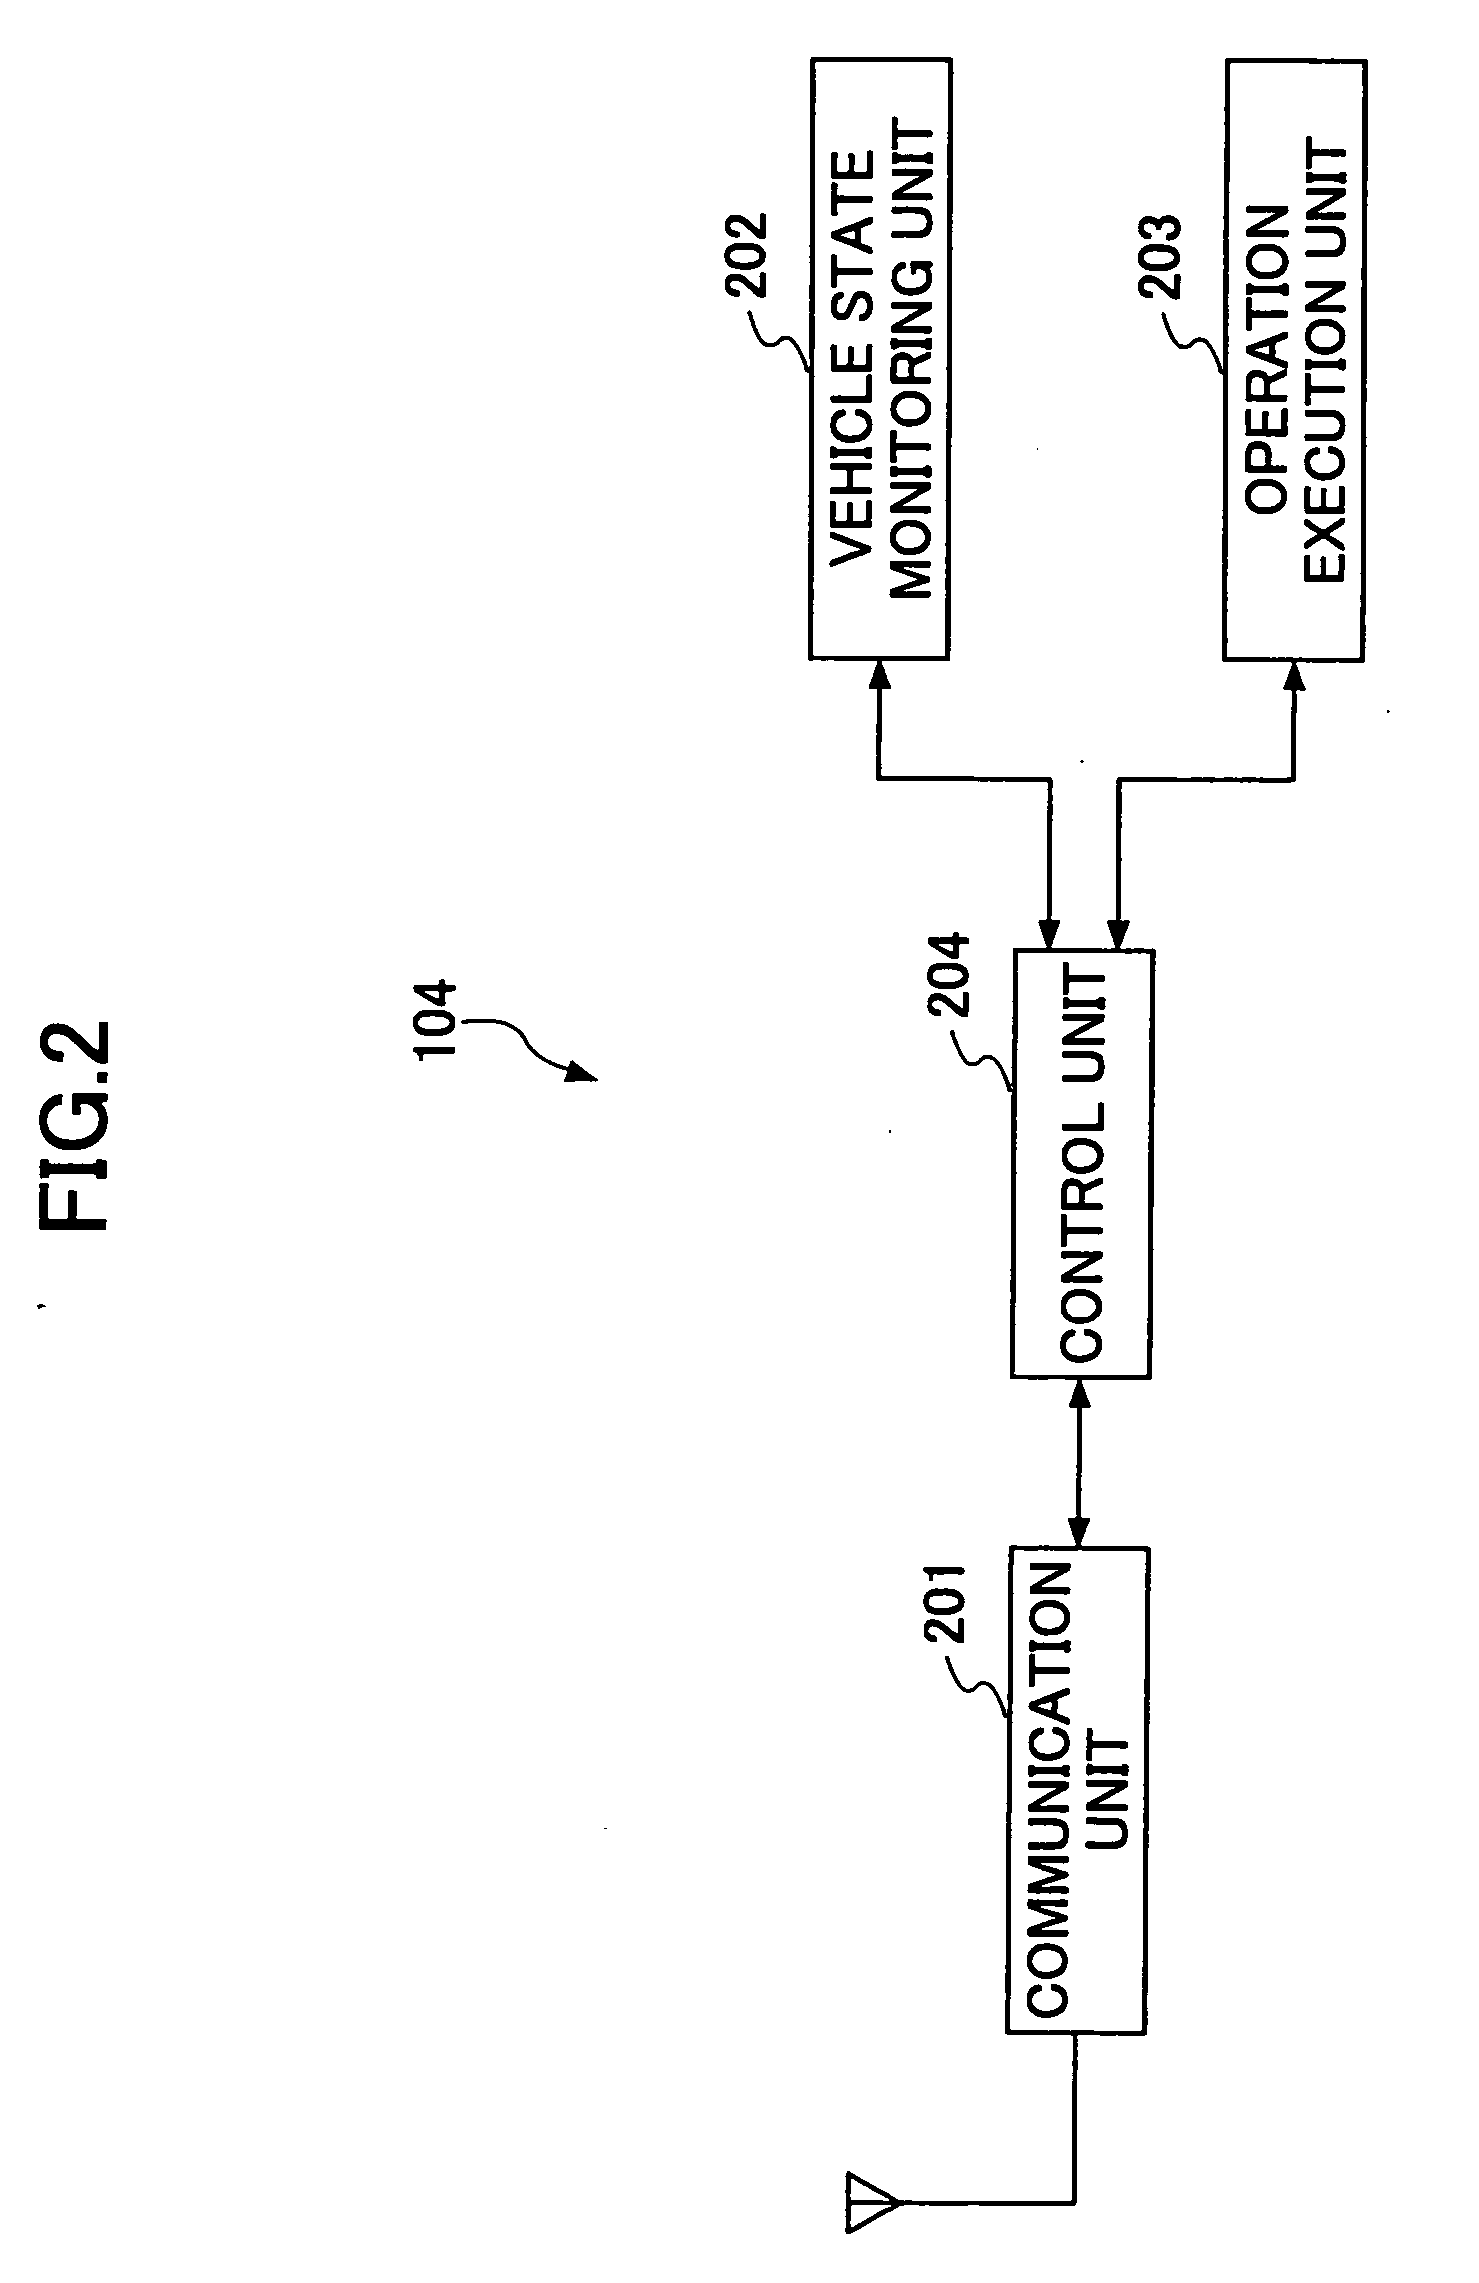 In-vehicle device